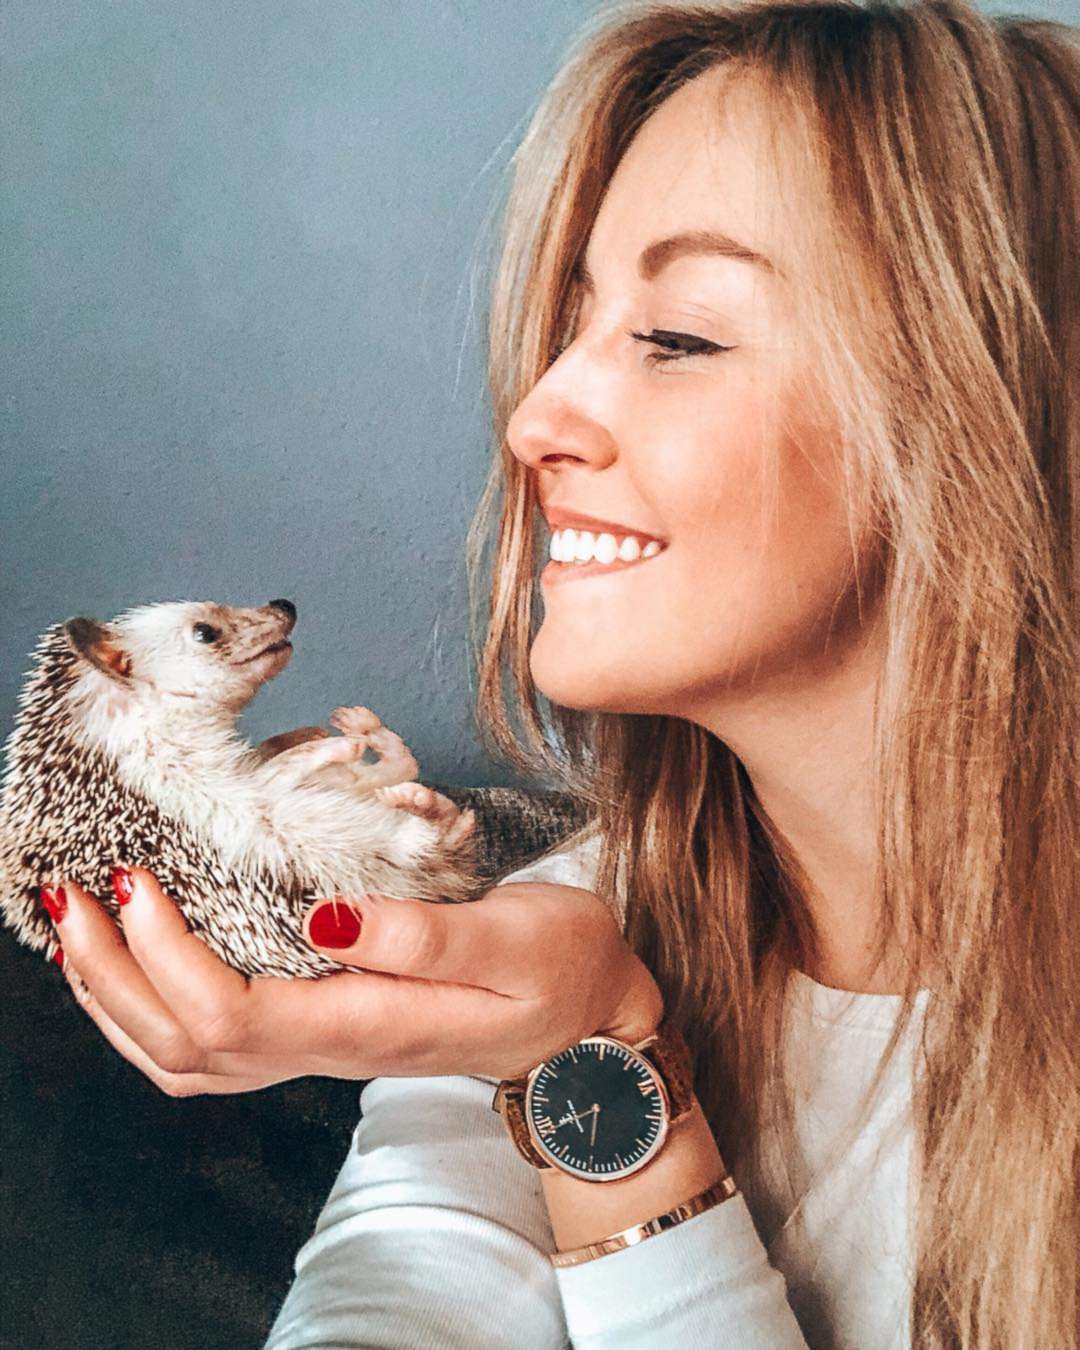 PHOTO: Talitha Girnus poses with her first hedgehog, Pokee.